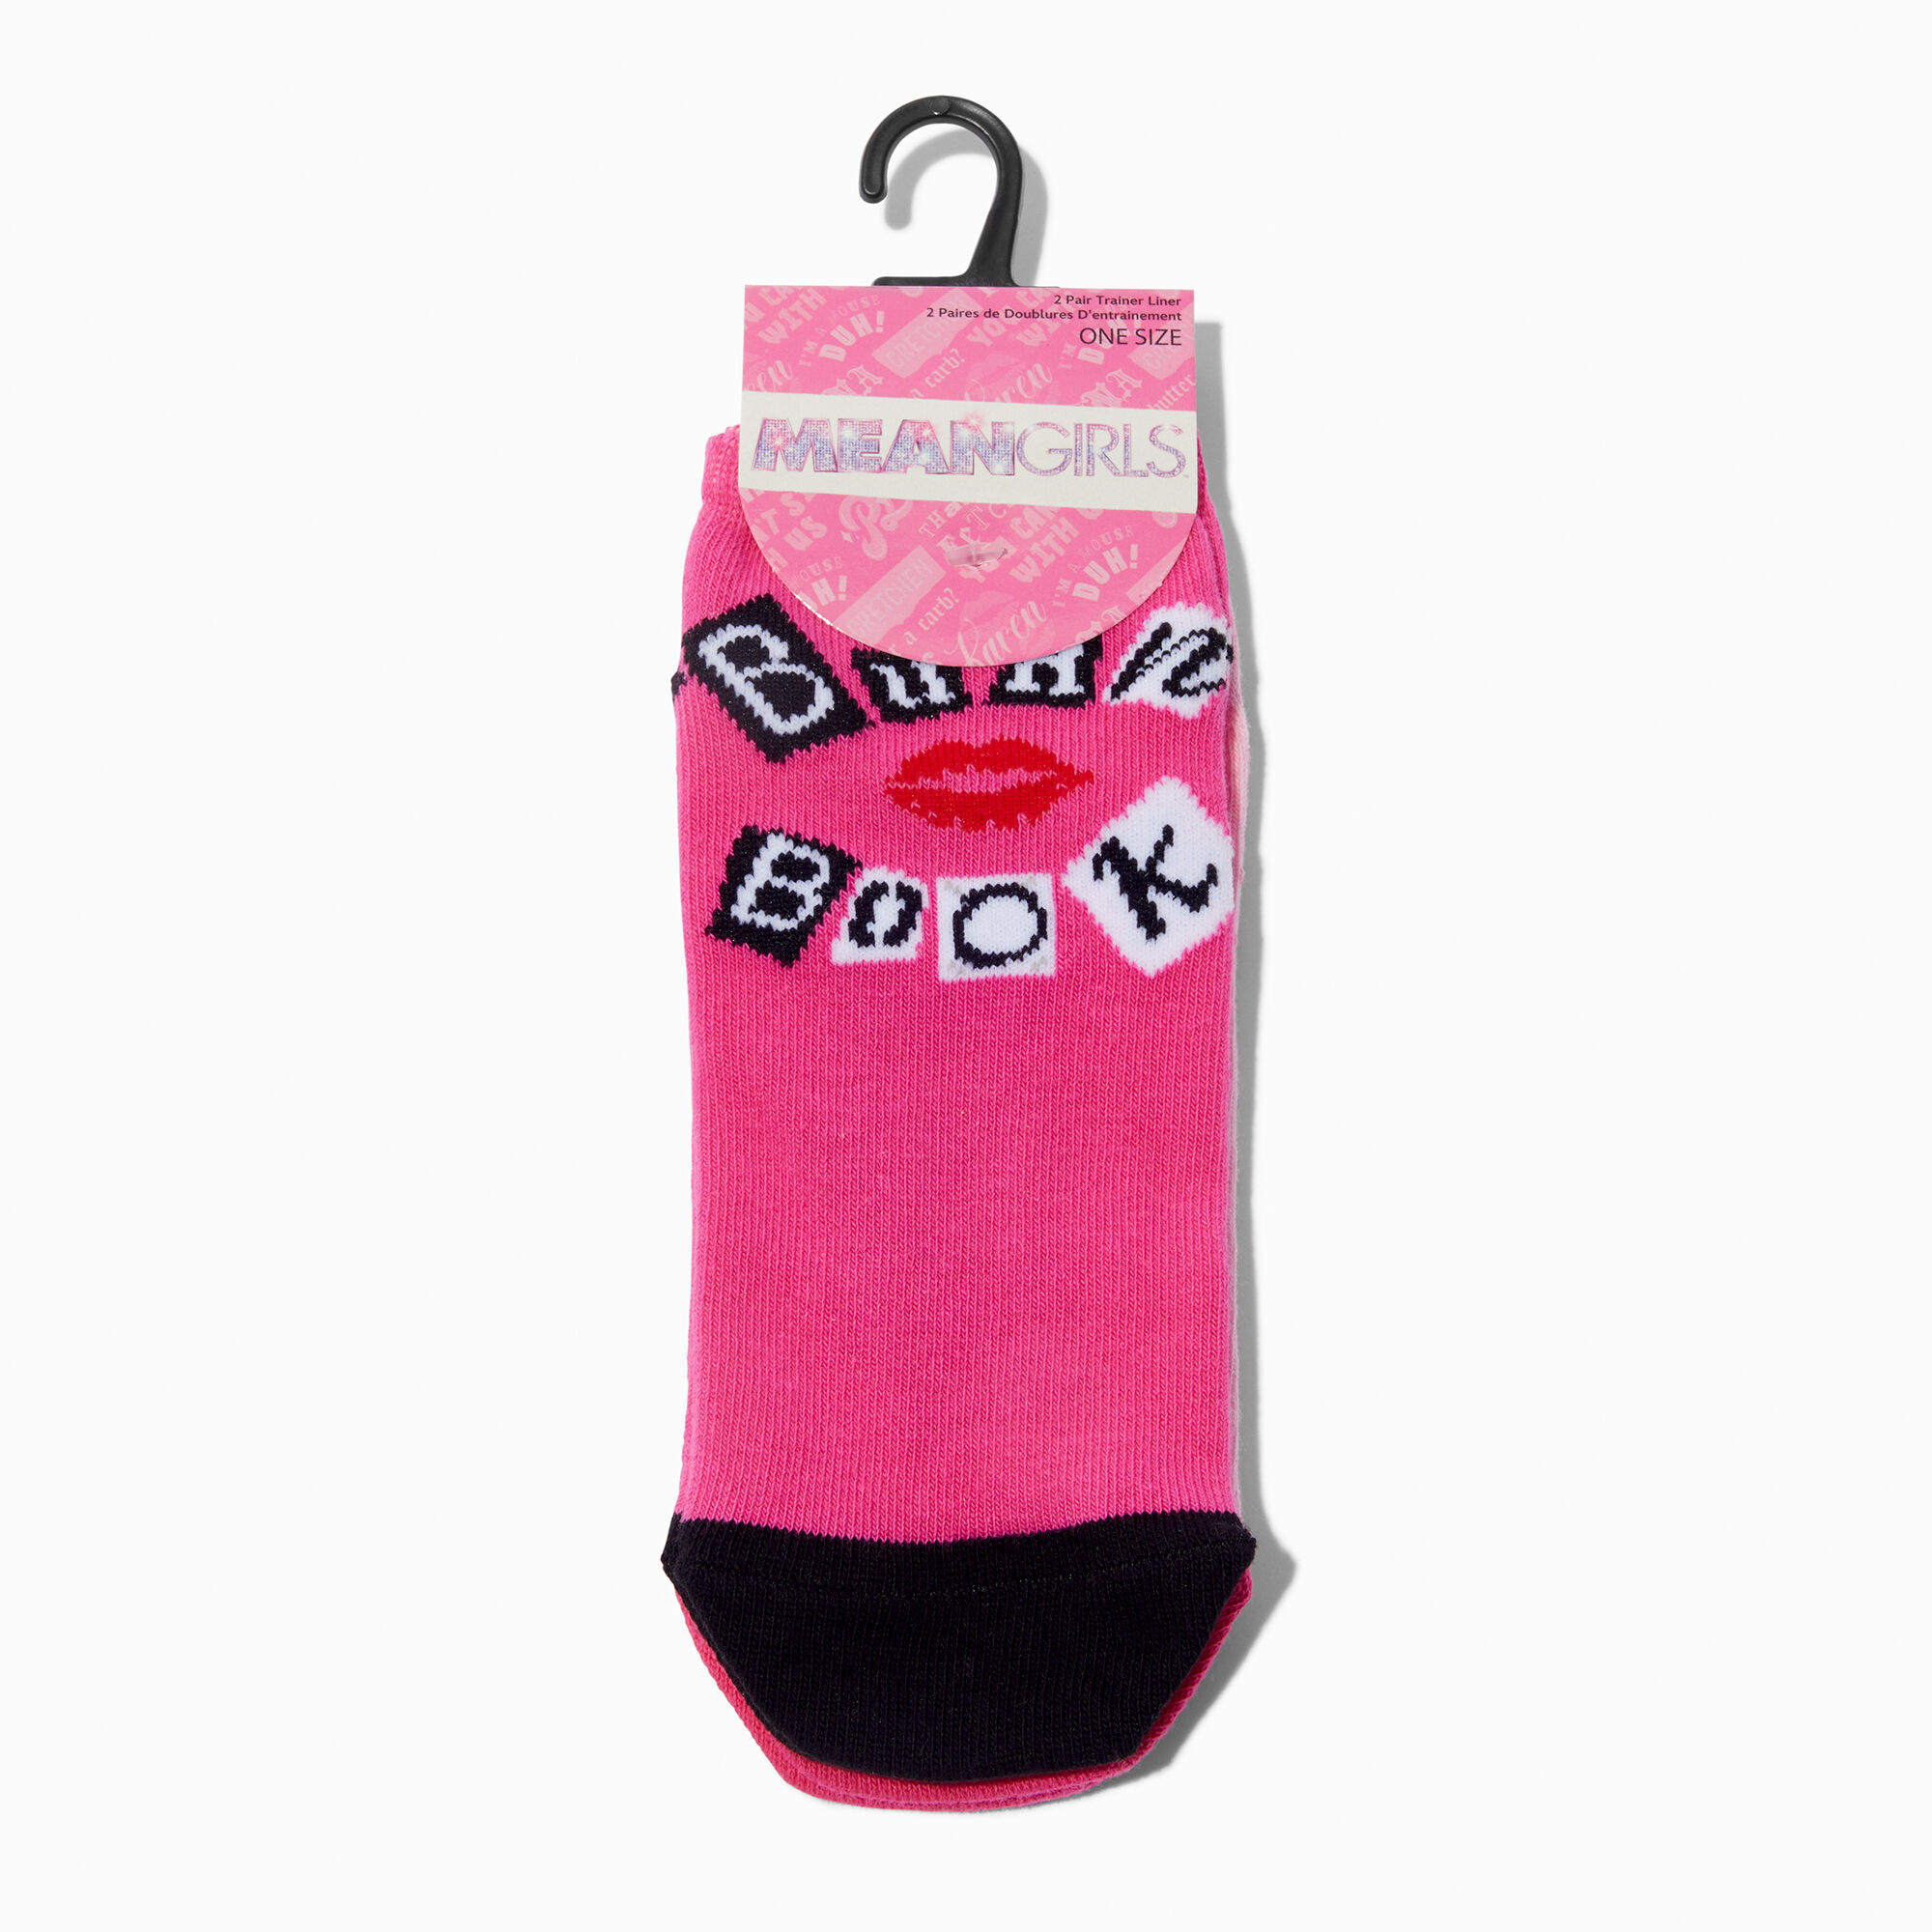 View Mean Girls X Claires Ankle Socks 2 Pack information